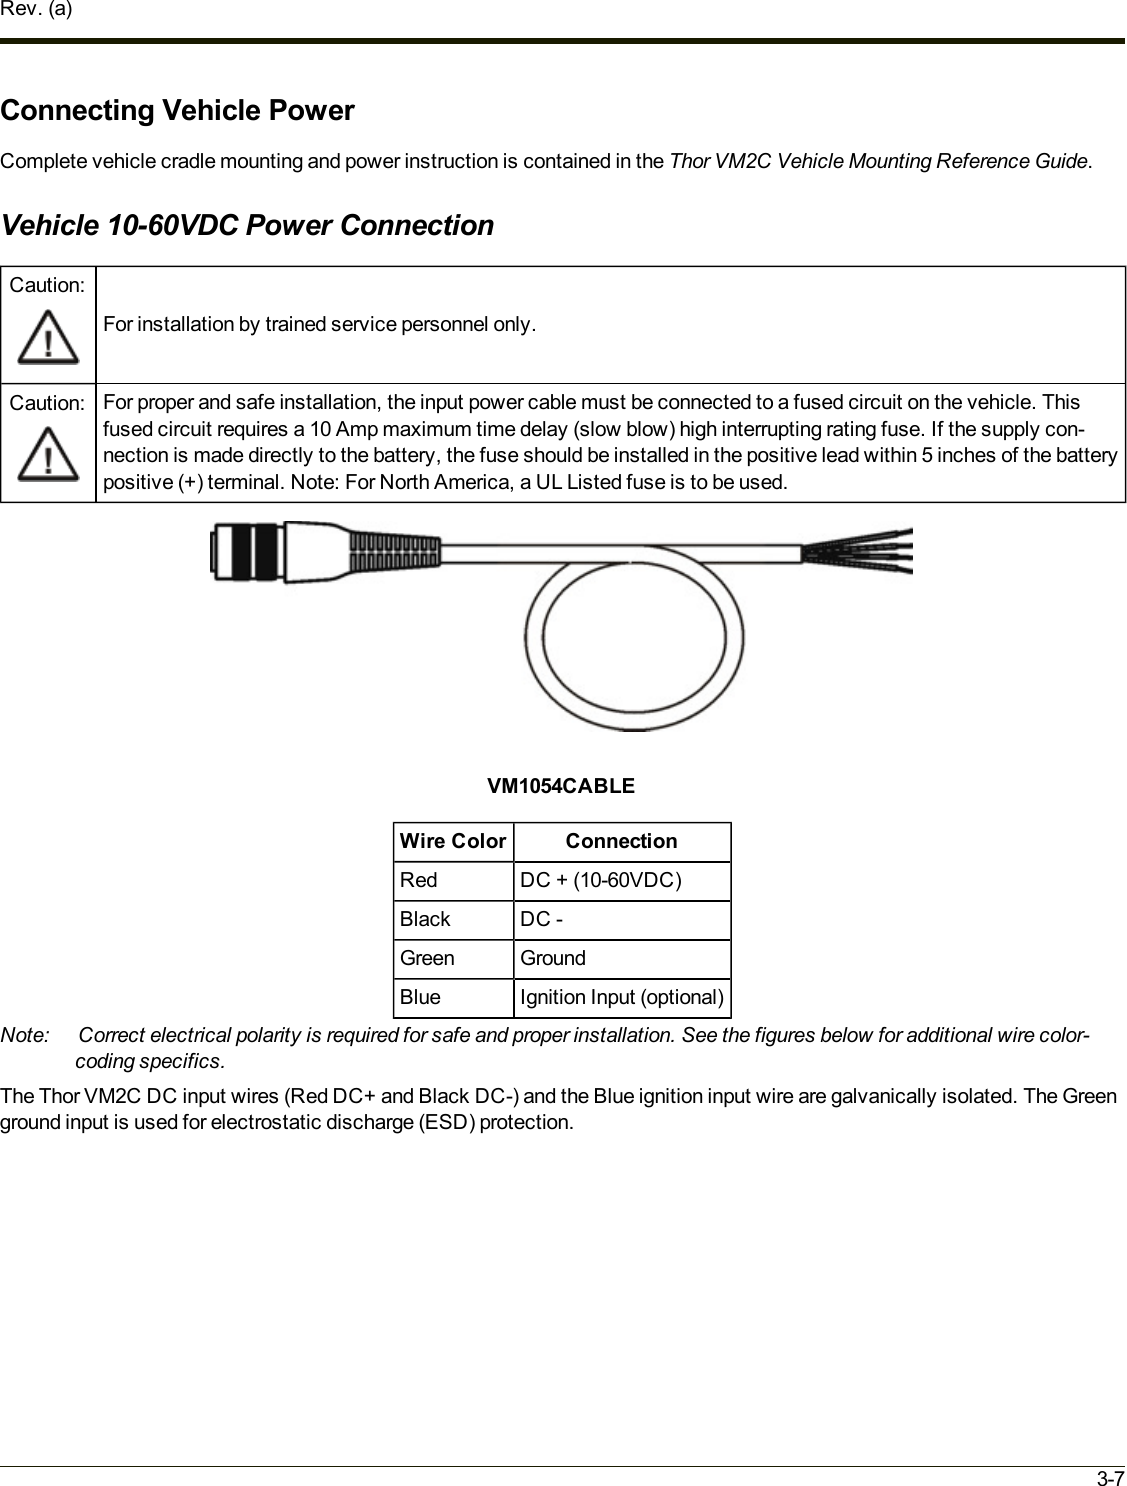 Rev. (a)Connecting Vehicle PowerComplete vehicle cradle mounting and power instruction is contained in the Thor VM2C Vehicle Mounting Reference Guide.Vehicle 10-60VDC Power ConnectionCaution:For installation by trained service personnel only.Caution: For proper and safe installation, the input power cable must be connected to a fused circuit on the vehicle. Thisfused circuit requires a 10 Amp maximum time delay (slow blow) high interrupting rating fuse. If the supply con-nection is made directly to the battery, the fuse should be installed in the positive lead within 5 inches of the batterypositive (+) terminal. Note: For North America, a UL Listed fuse is to be used.VM1054CABLEWire Color ConnectionRed DC + (10-60VDC)Black DC -Green GroundBlue Ignition Input (optional)Note: Correct electrical polarity is required for safe and proper installation. See the figures below for additional wire color-coding specifics.The Thor VM2C DC input wires (Red DC+ and Black DC-) and the Blue ignition input wire are galvanically isolated. The Greenground input is used for electrostatic discharge (ESD) protection.3-7